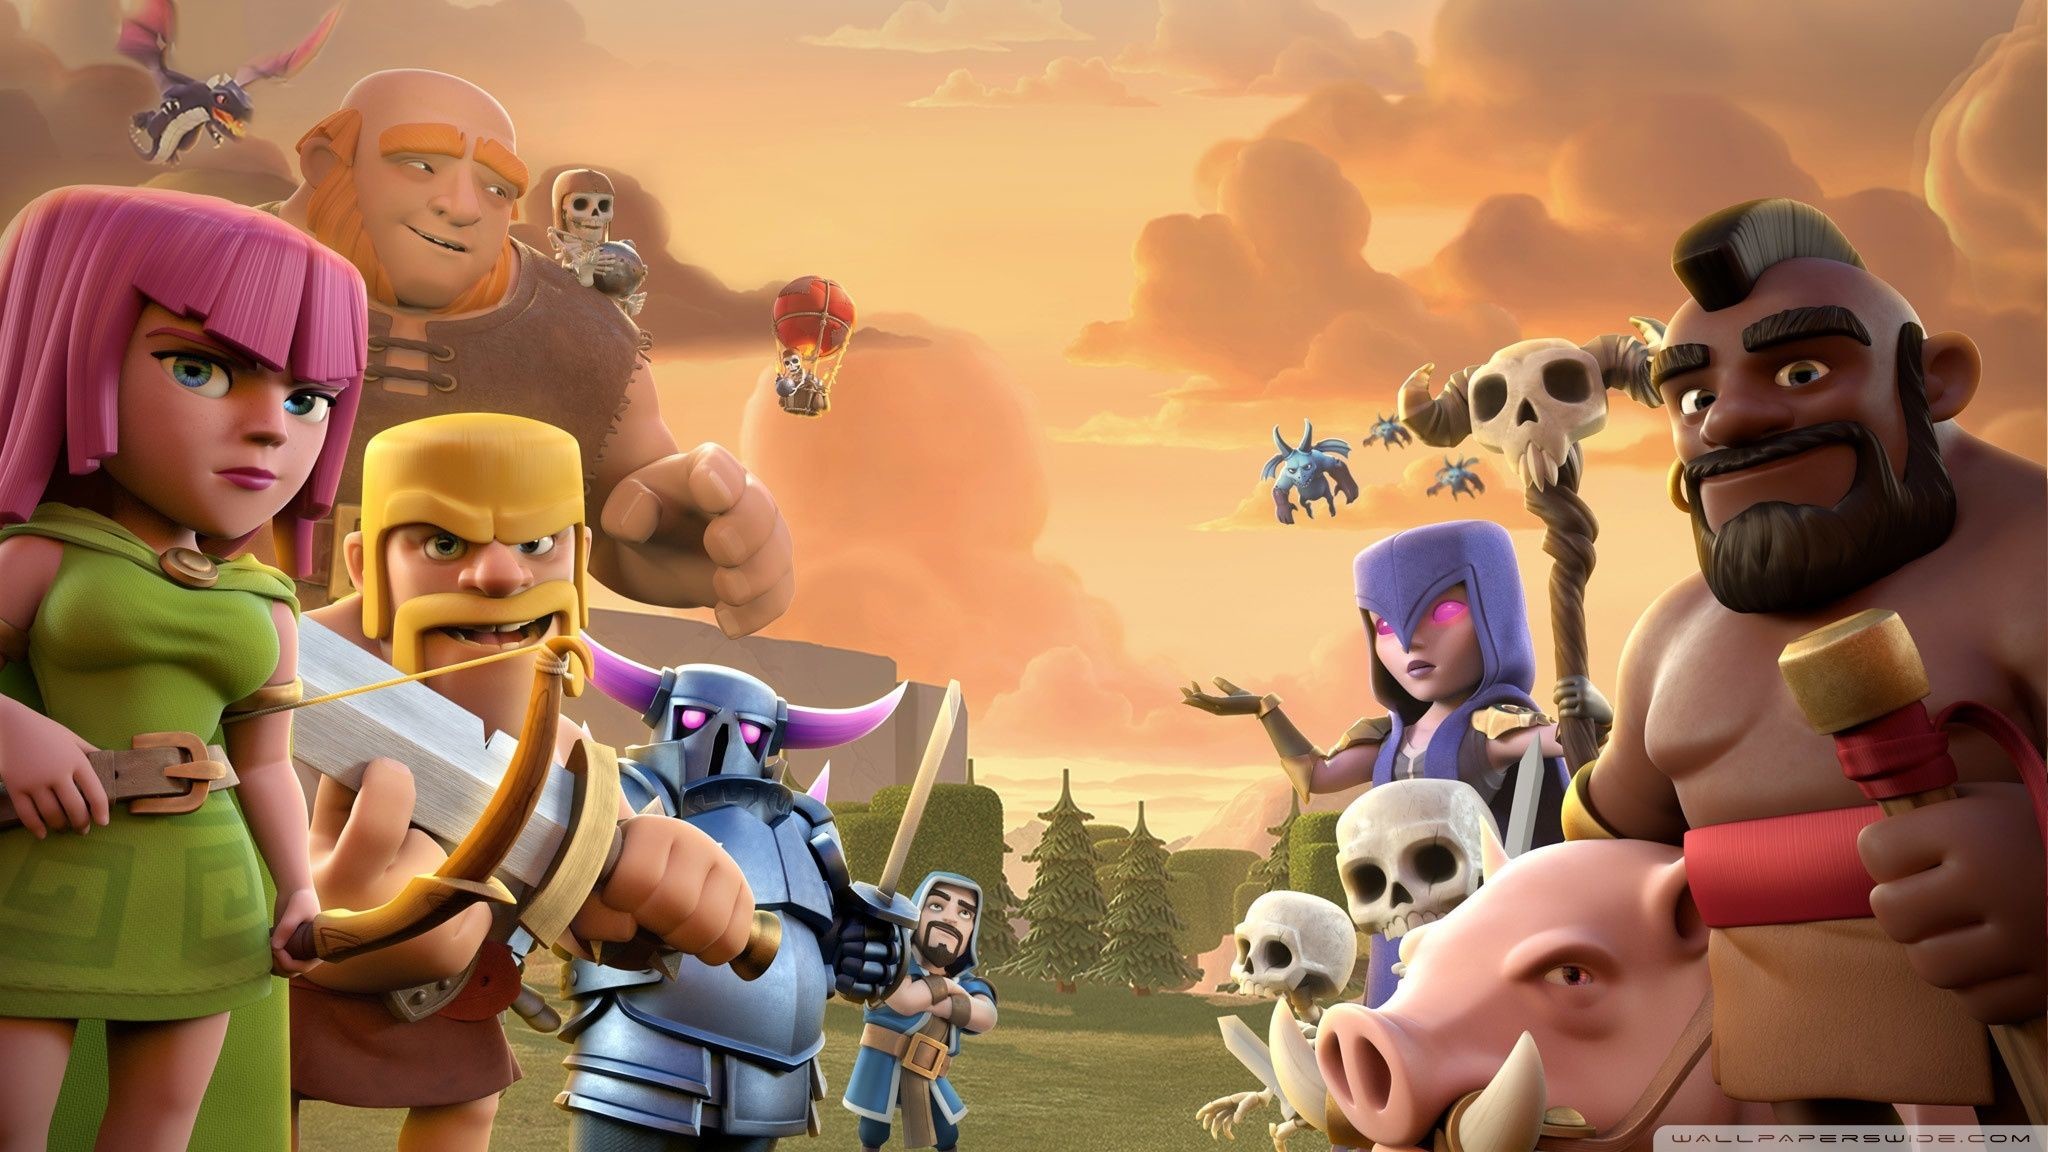 2048x1152 #8 Wallpaper HD Android Clash of Clans